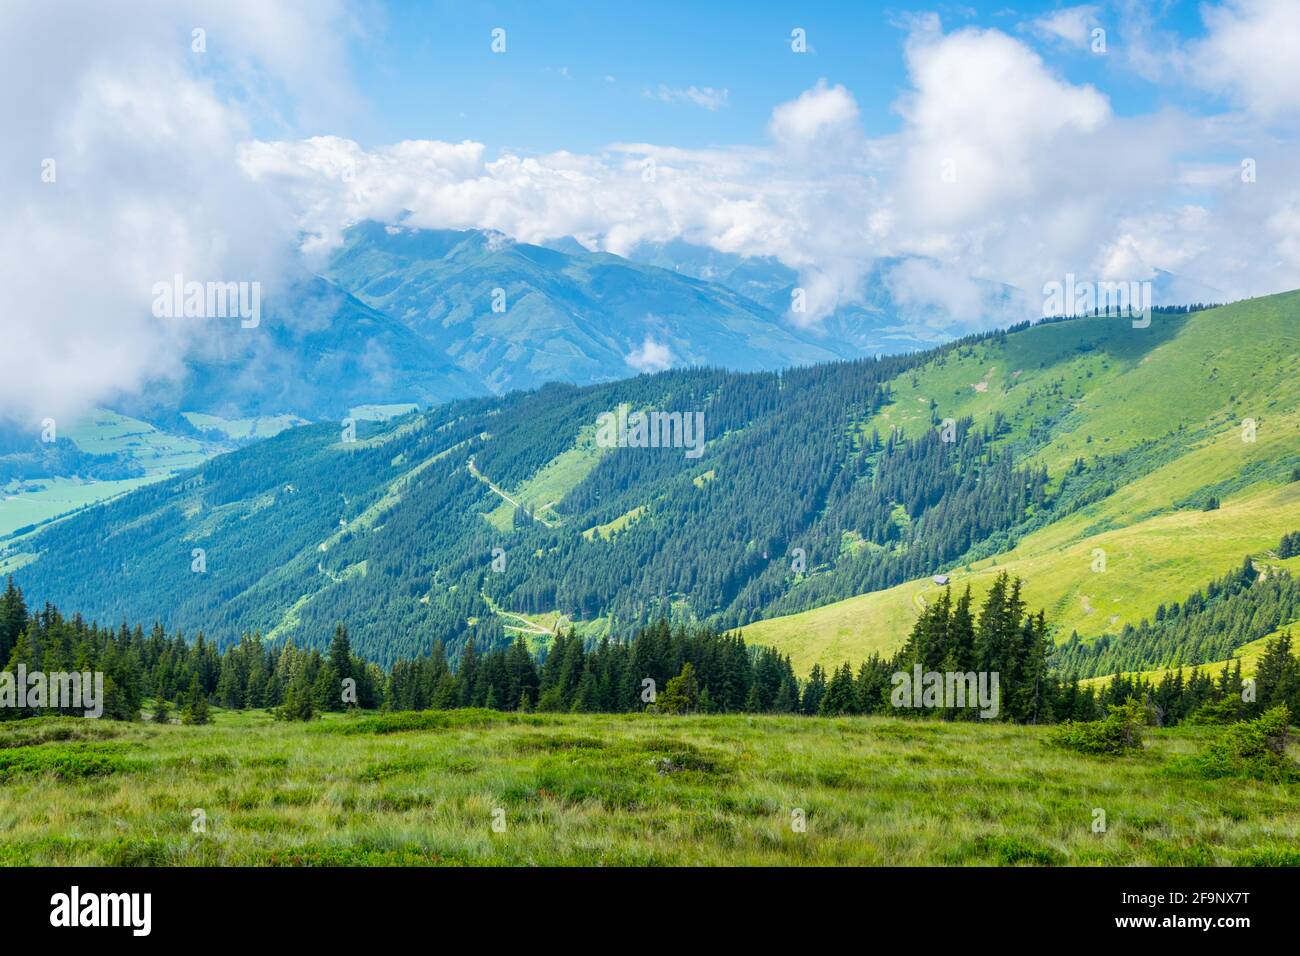 View of the alps along the famous hiking trail Pinzgauer spaziergang near Zell am See, Salzburg region, Austria. Stock Photo